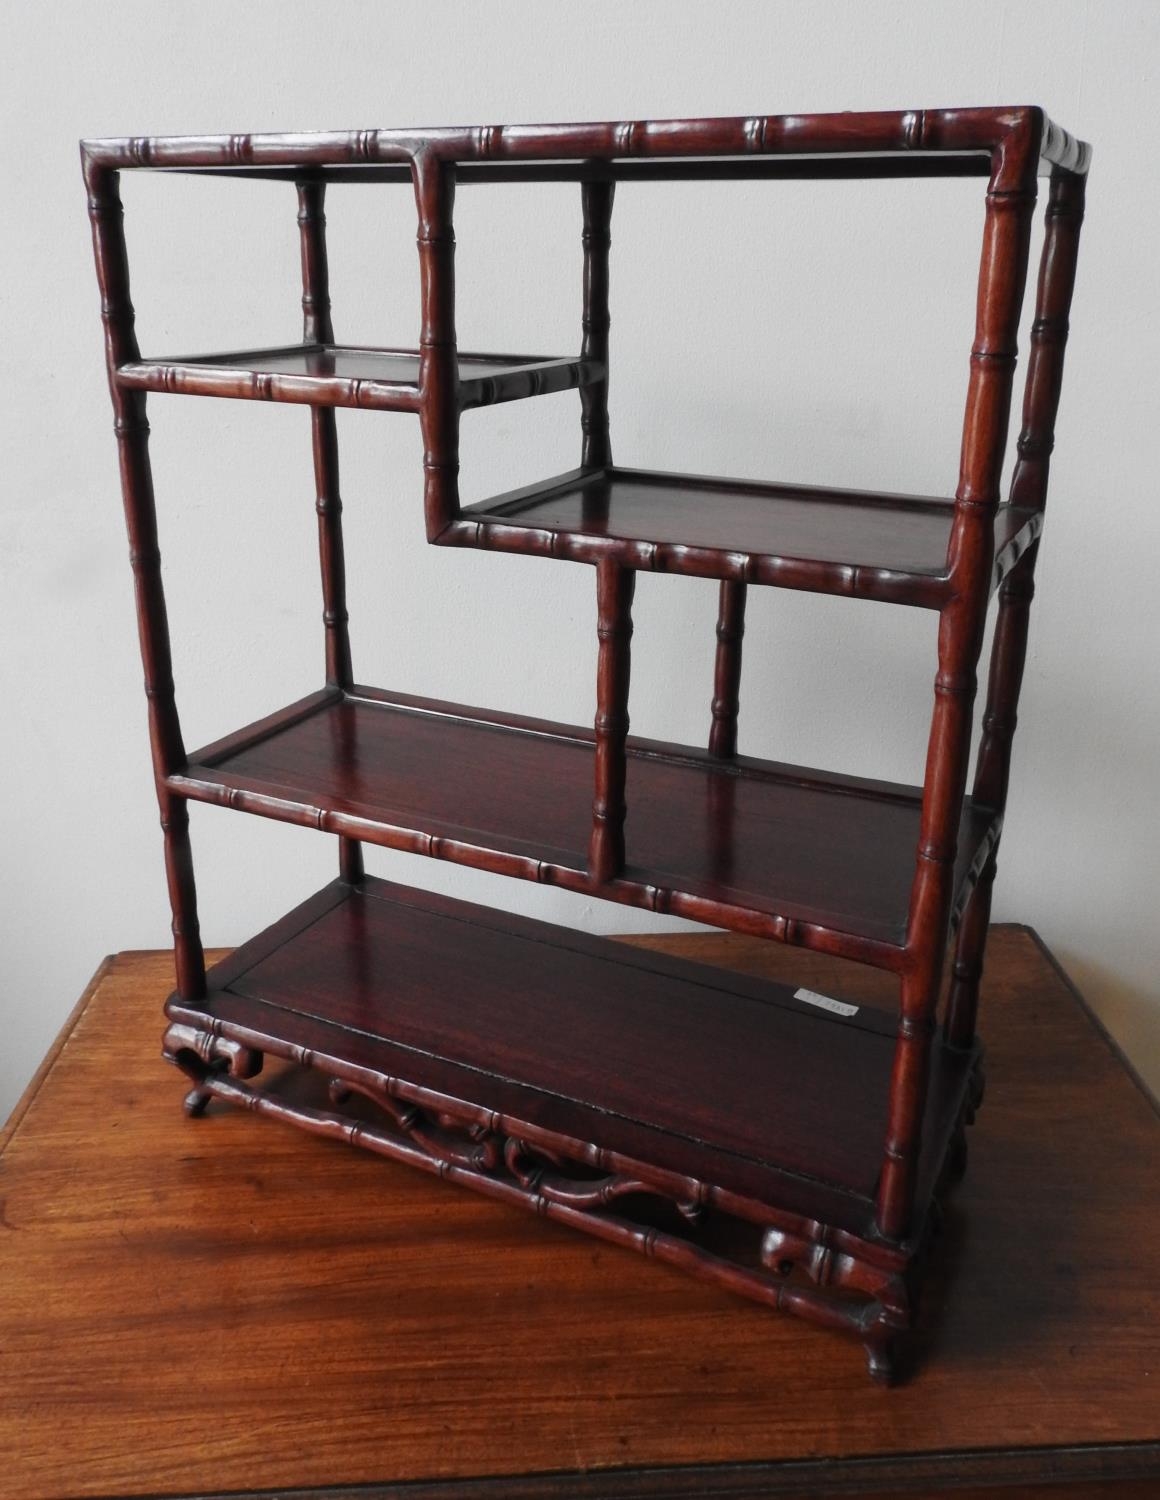 SET OF CHINESE SIMULATED BAMBOO HARDWOOD STANDING SHELVES 20TH CENTURY 58cm high, 45cm wide